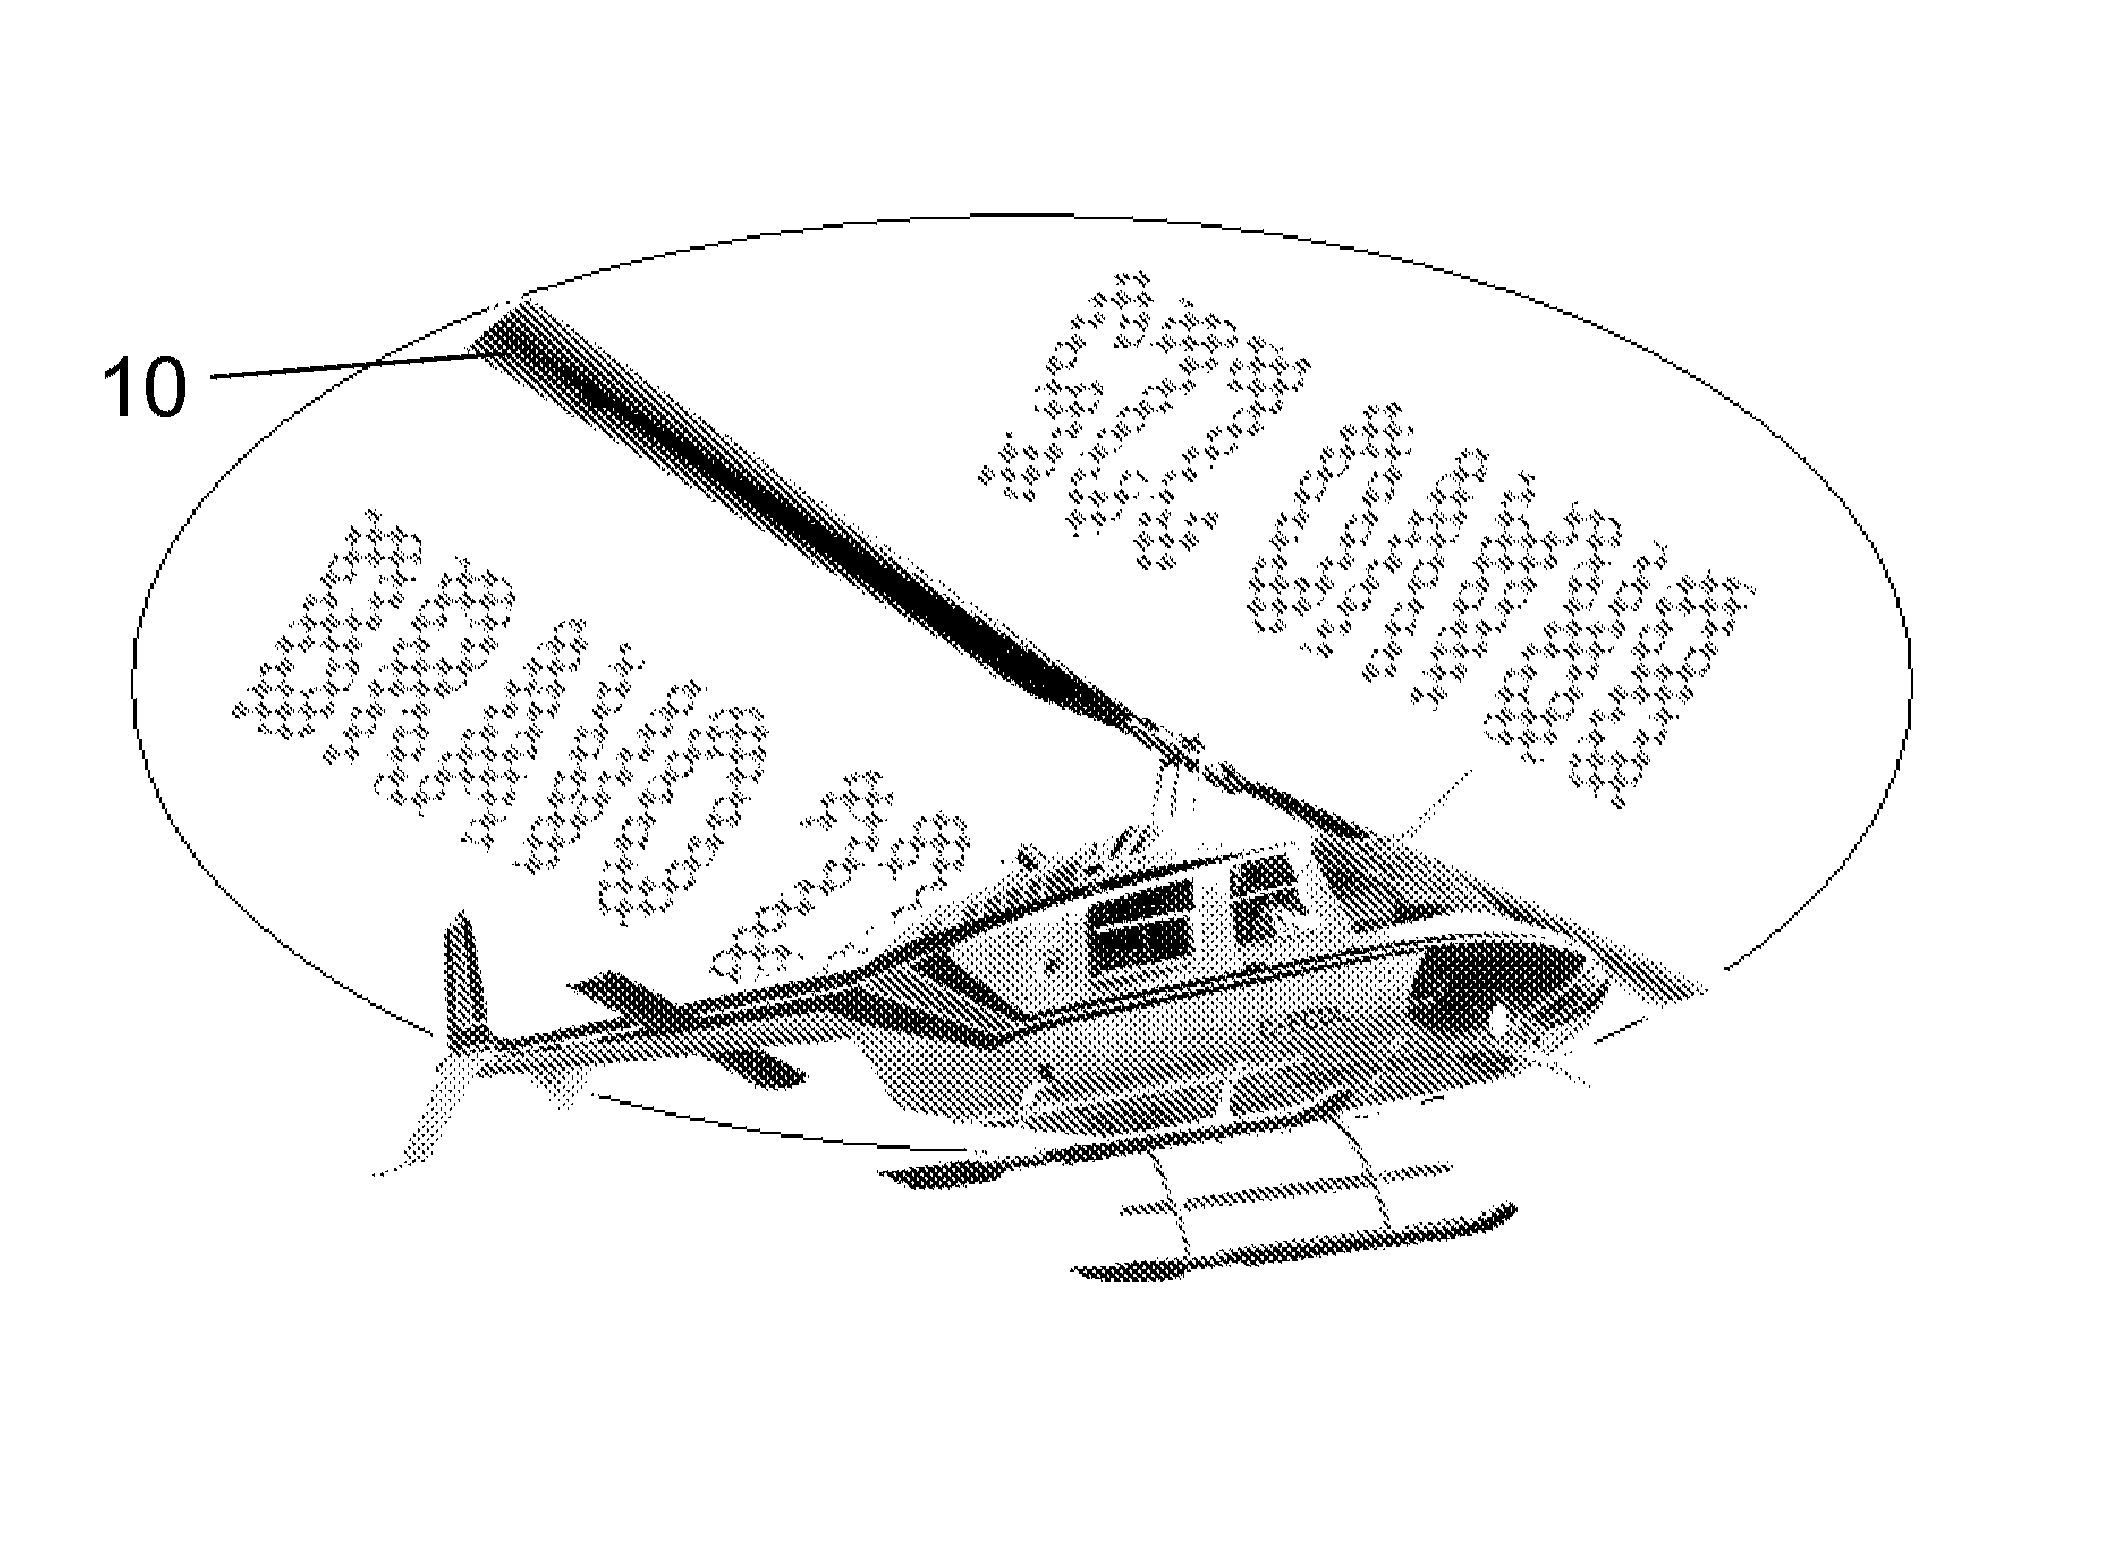 Method for displaying images and/or other information on aircraft blades